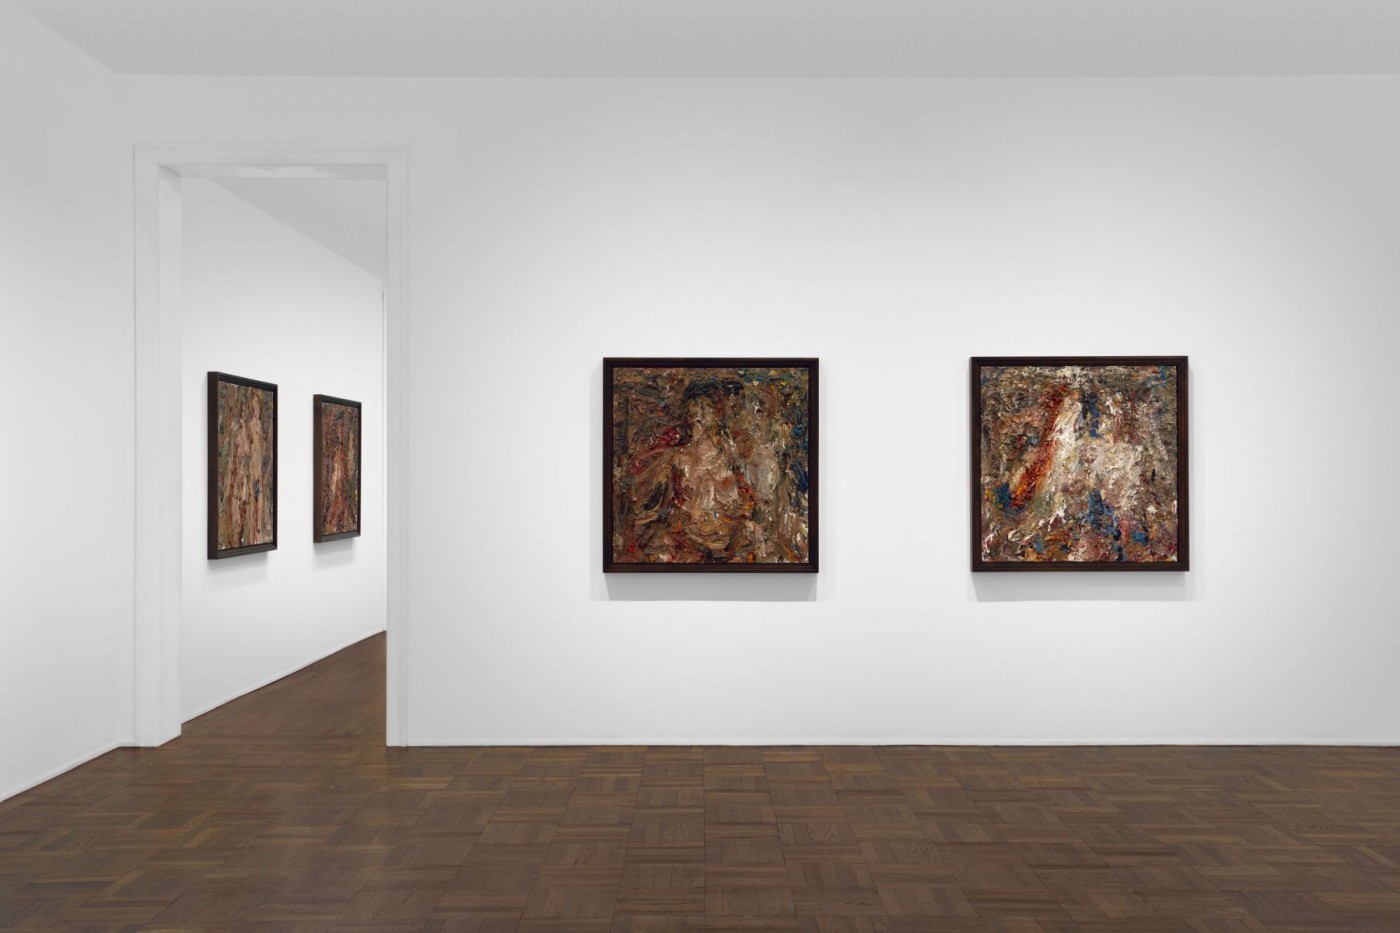 Installation image for Eugène Leroy: About Marina, at Michael Werner Gallery